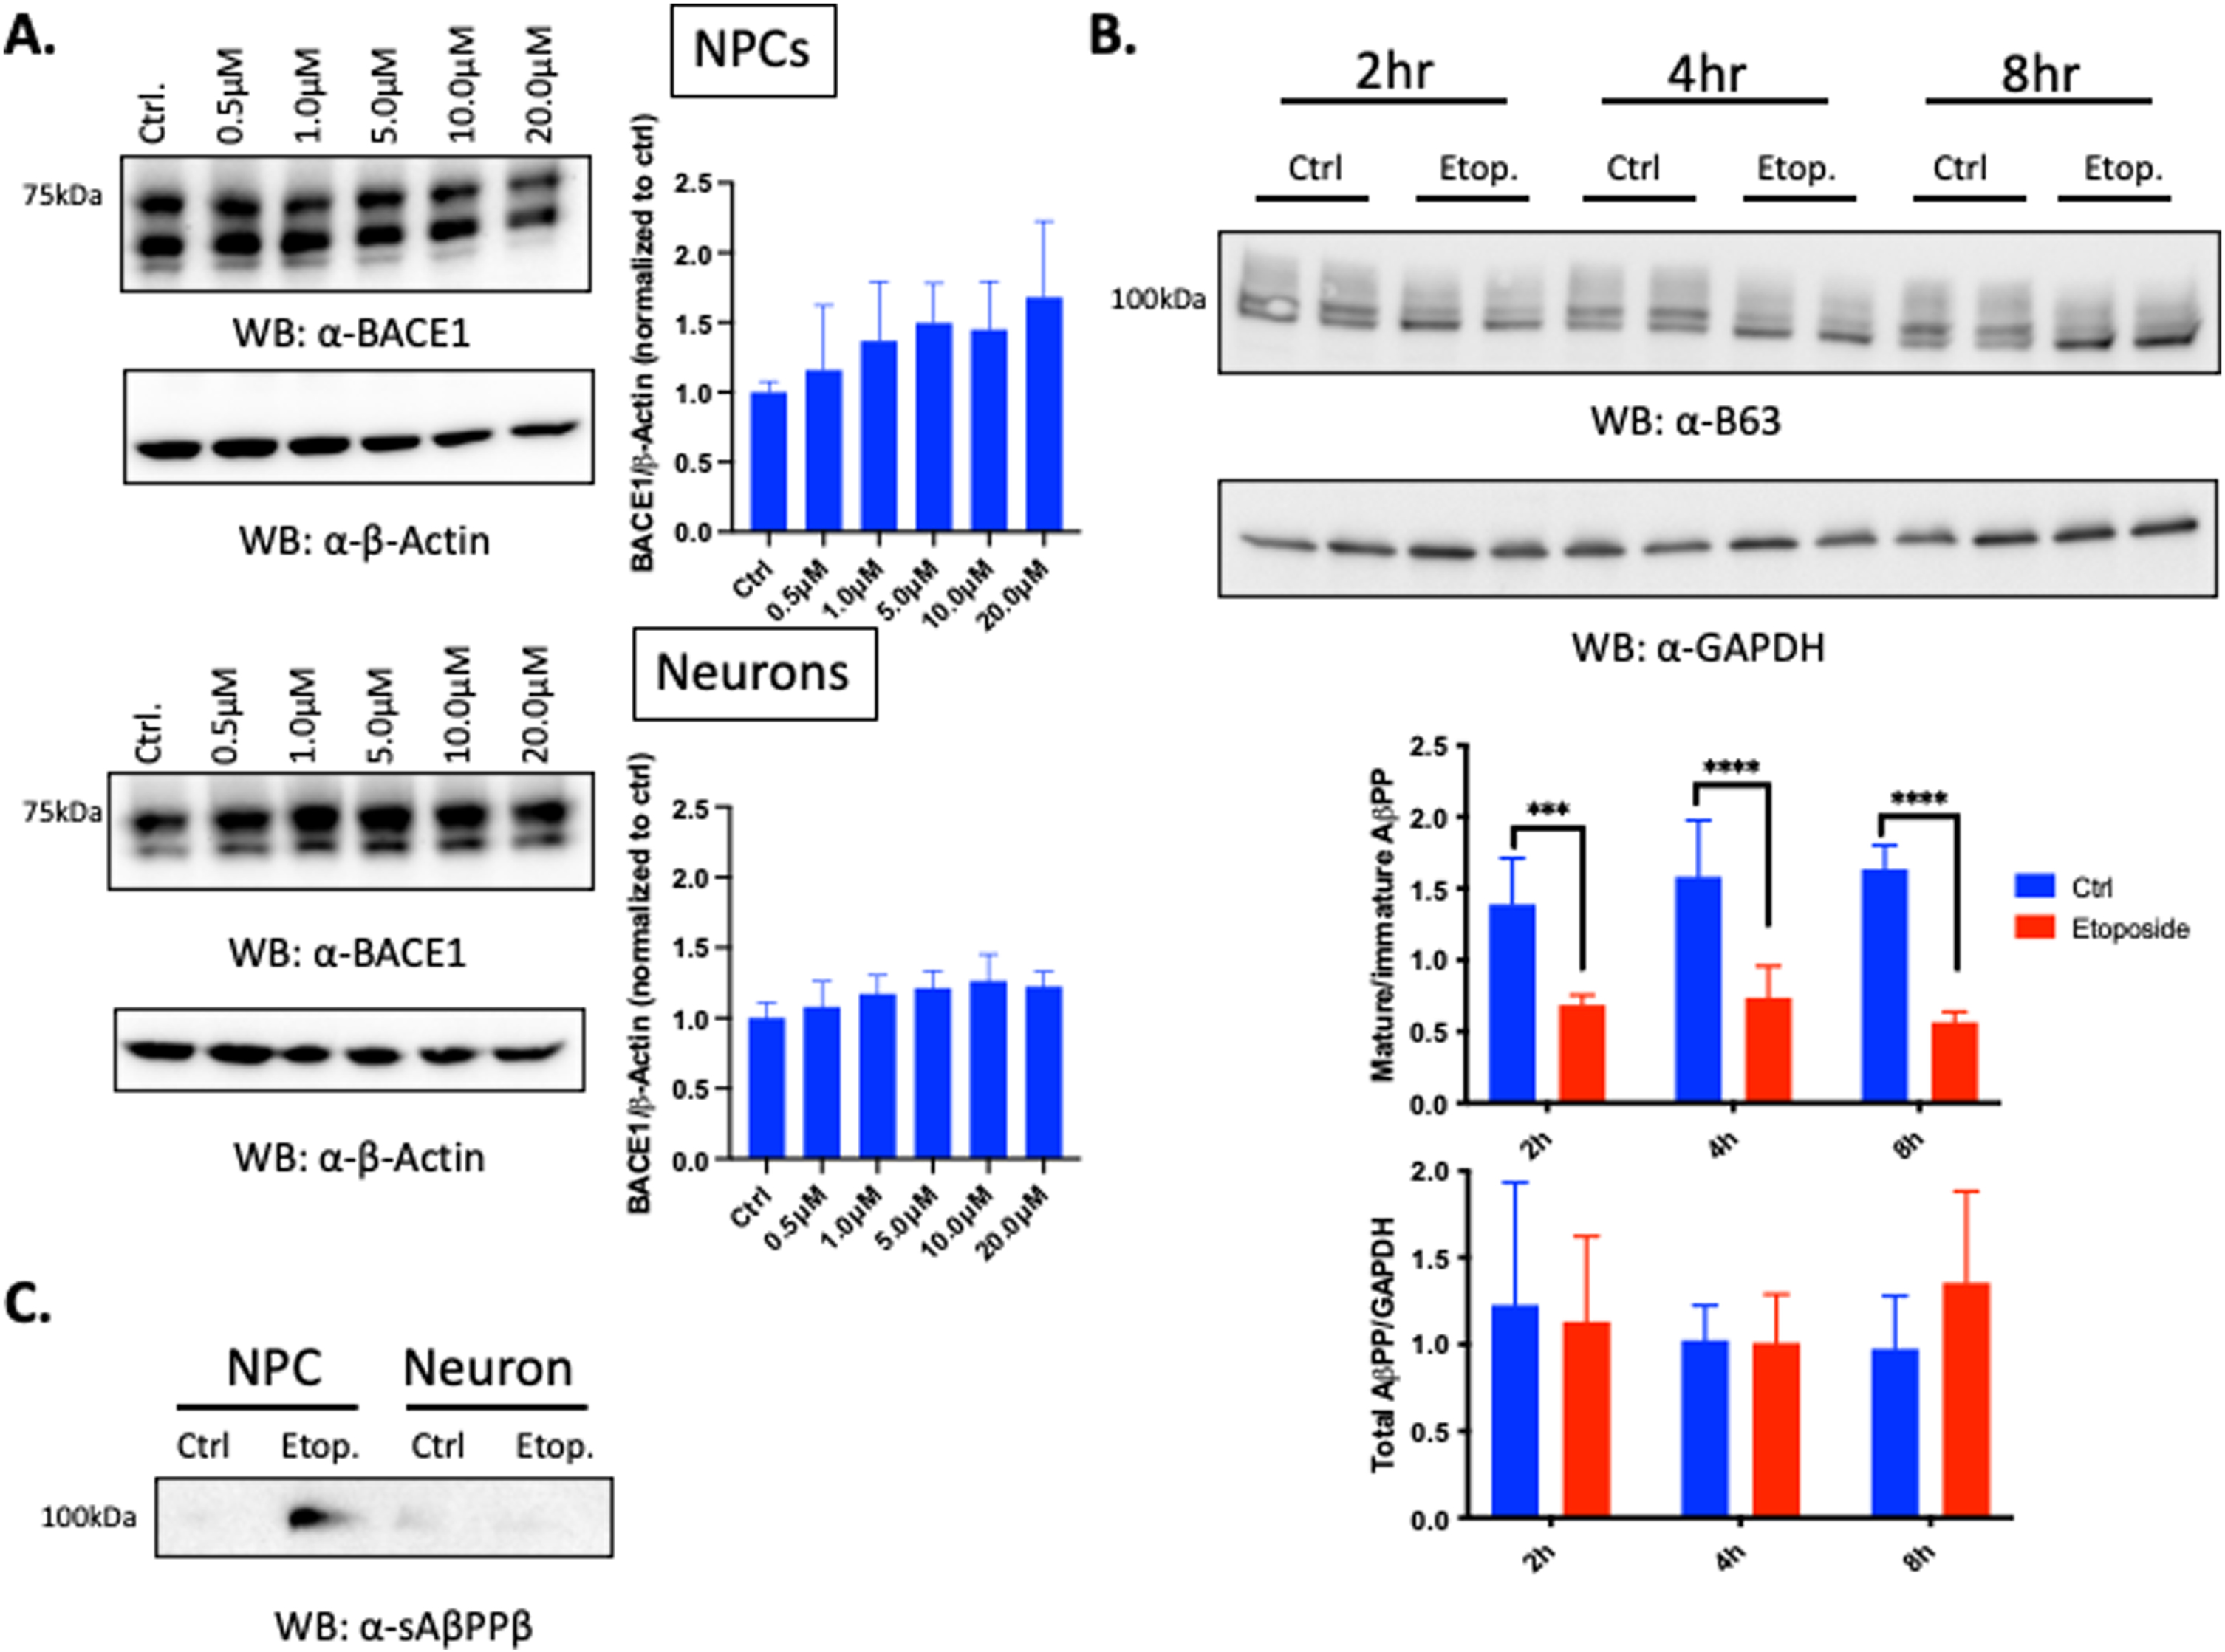 DSBs increase sAβPPβ, but not total AβPP in ReN GA2 NPCs. A) Western blot of endogenous BACE1 expression in ReN GA2 NPCs and 20 day differentiated neurons treated with and without designated concentrations of etoposide for 6 h and allowed to recover for 2 h. B) Western blot of endogenous AβPP expression in ReN GA2 NPCs treated with and without 10μM etoposide for 6 h and allowed to recover for designated times. C) Western blot of sAβPPβ in ReN GA2 NPCs and 20 day differentiated neurons with and without 10μM of etoposide treatment for 6 h and allowed to recover for 2 h. Error bars represent means±SD of two to three separate experiments, and the p values were determined using two-way ANOVA and Tukey’s multiple comparisons test. ***p < 0.001, ****p < 0.0001.